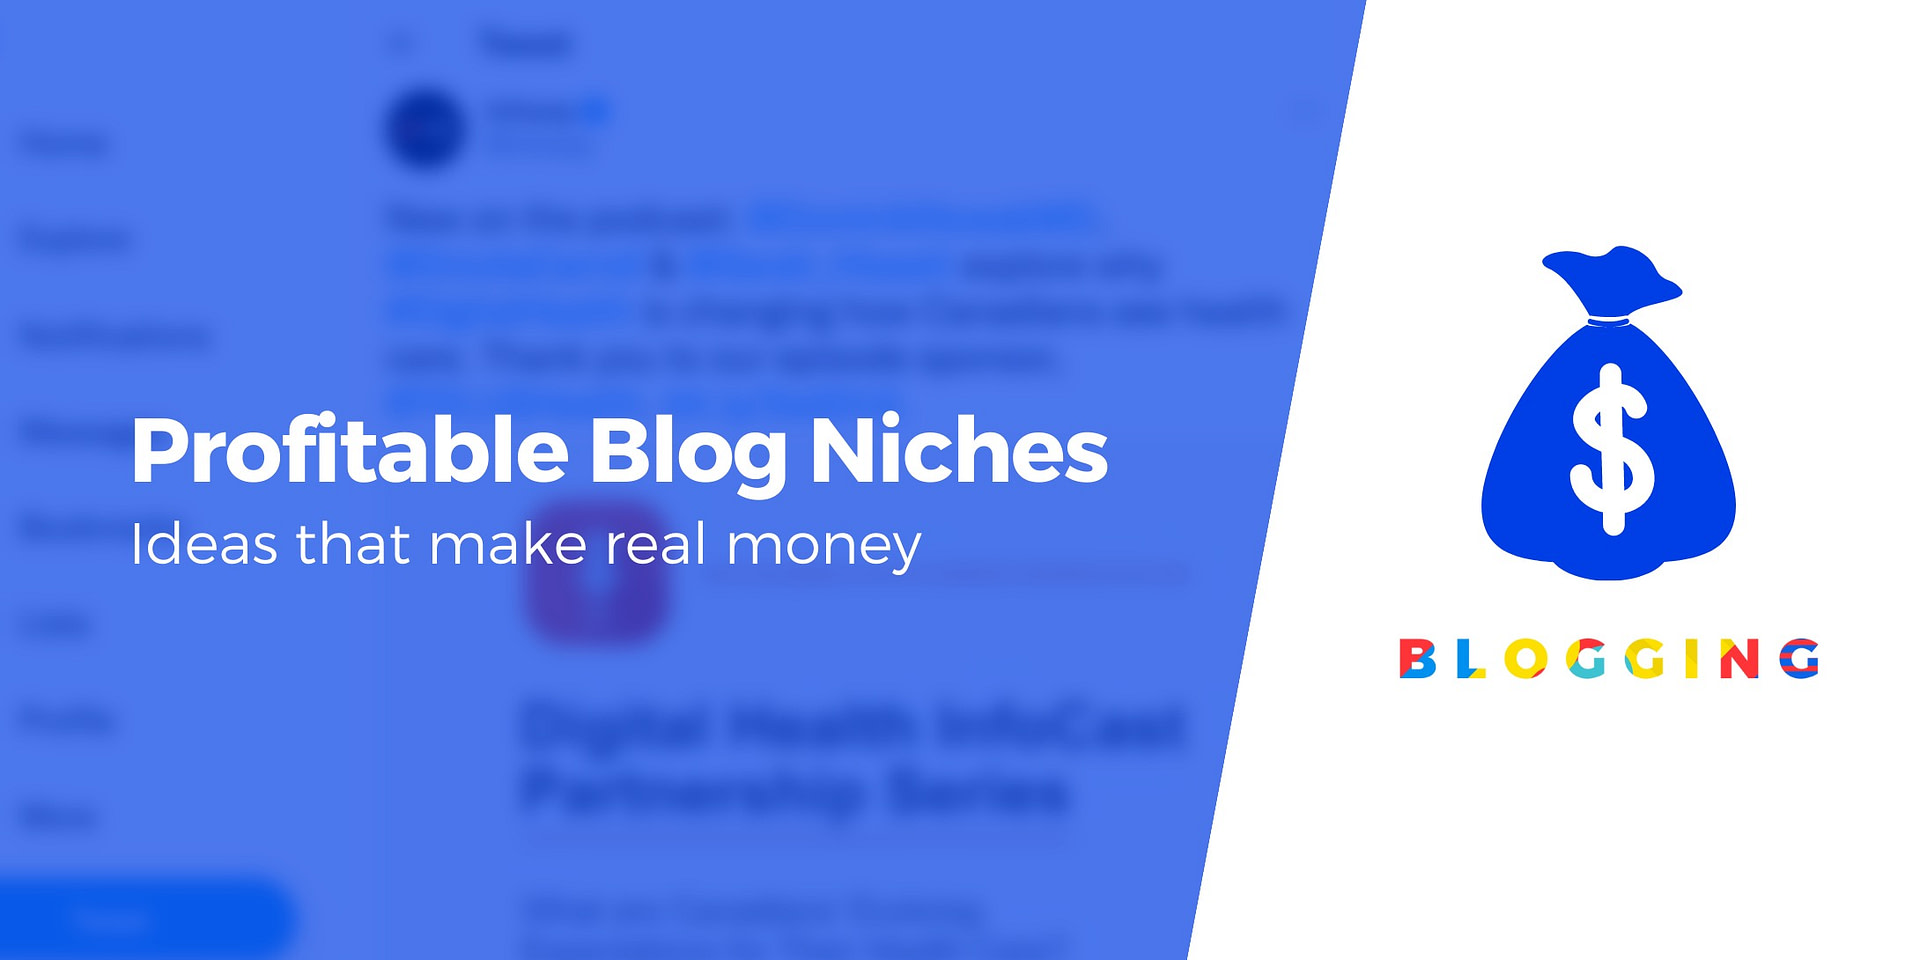 6 Most Profitable Blog Niches for 2023 (Based On Real Data)